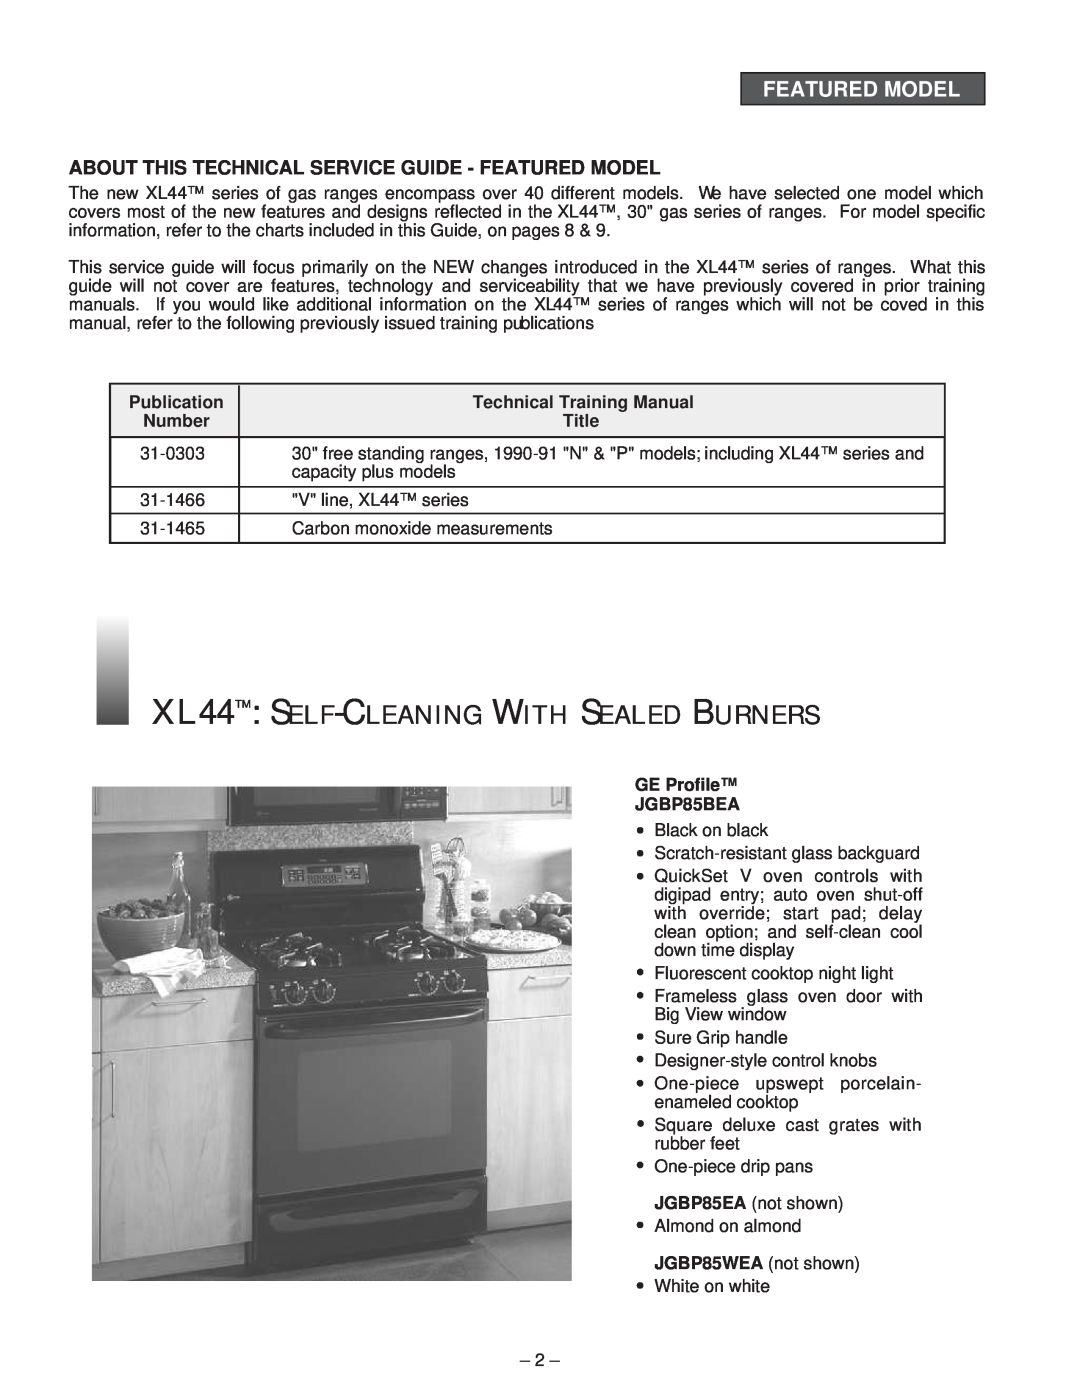 GE JGBP35 A manual XL44 SELF-CLEANING WITH SEALED BURNERS, About This Technical Service Guide - Featured Model, Publication 